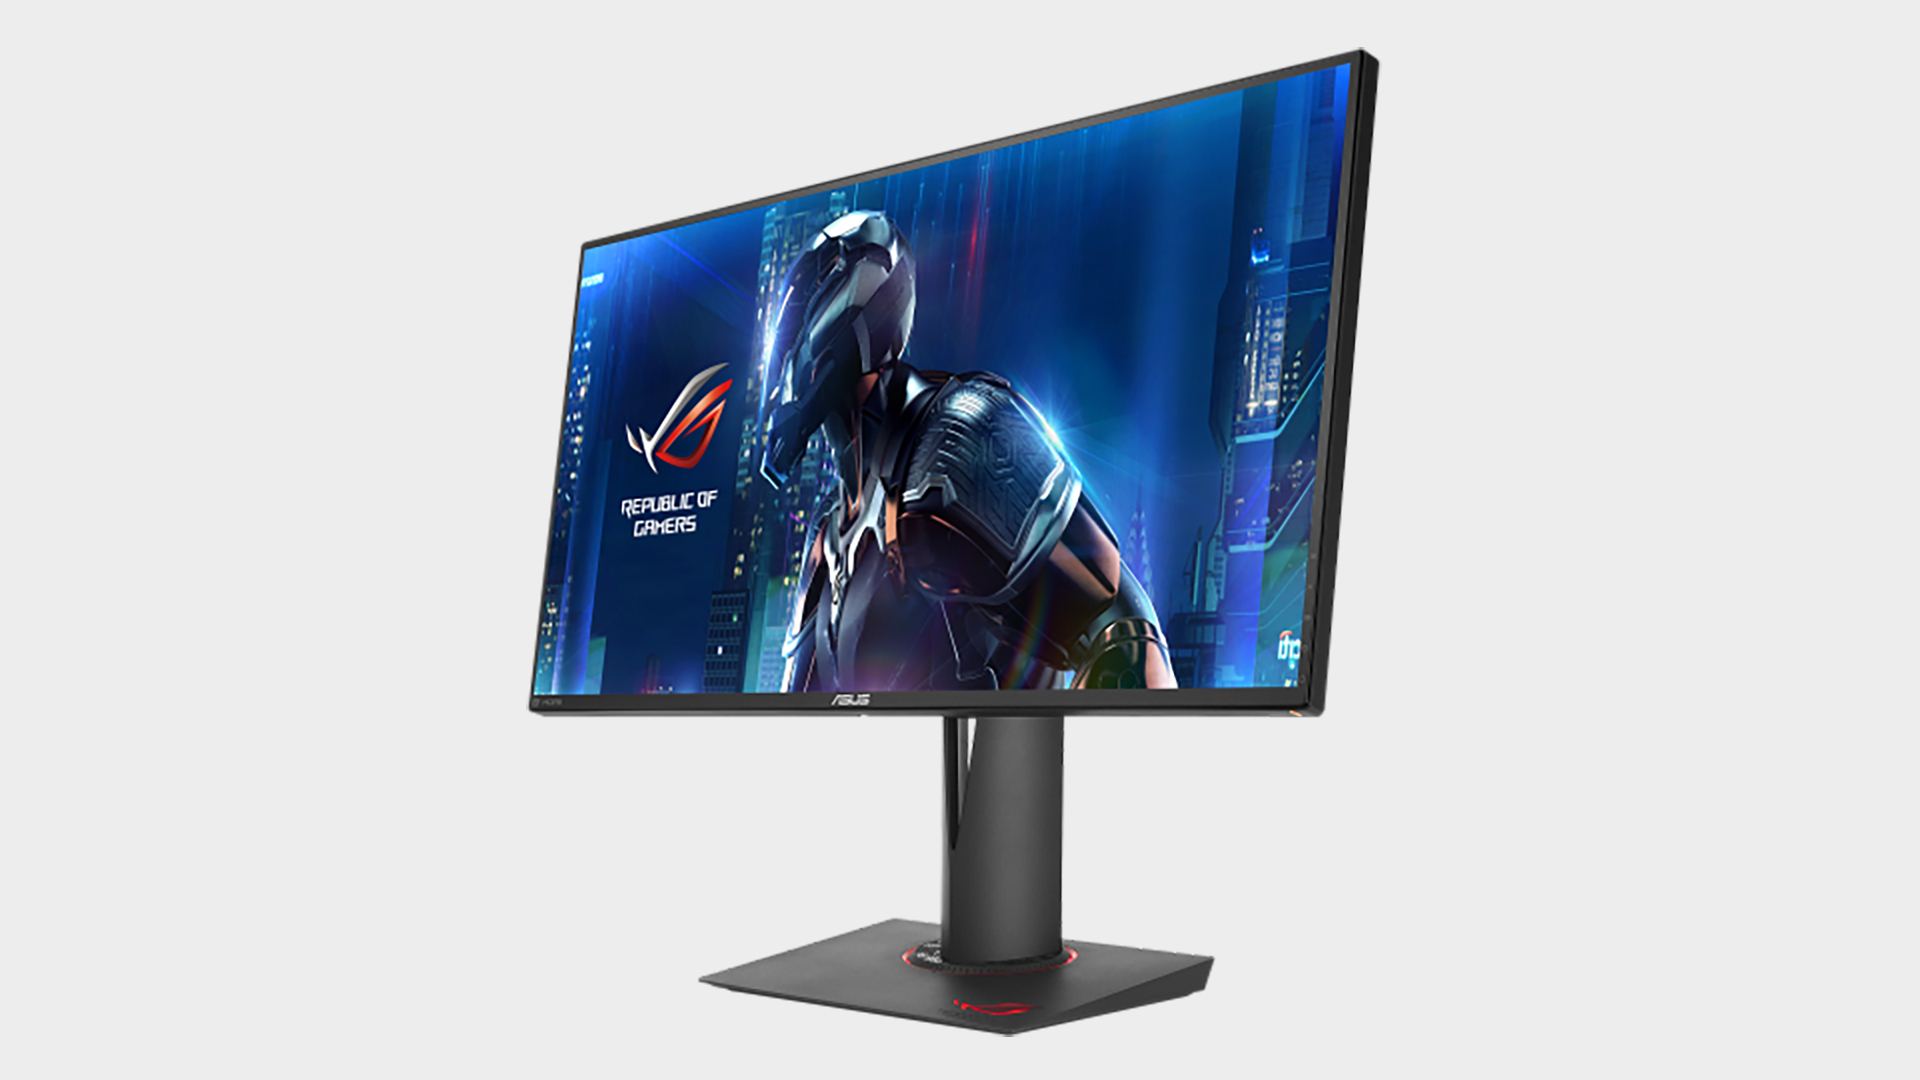 Asus ROG Swift PG279Q gaming monitor on grey background